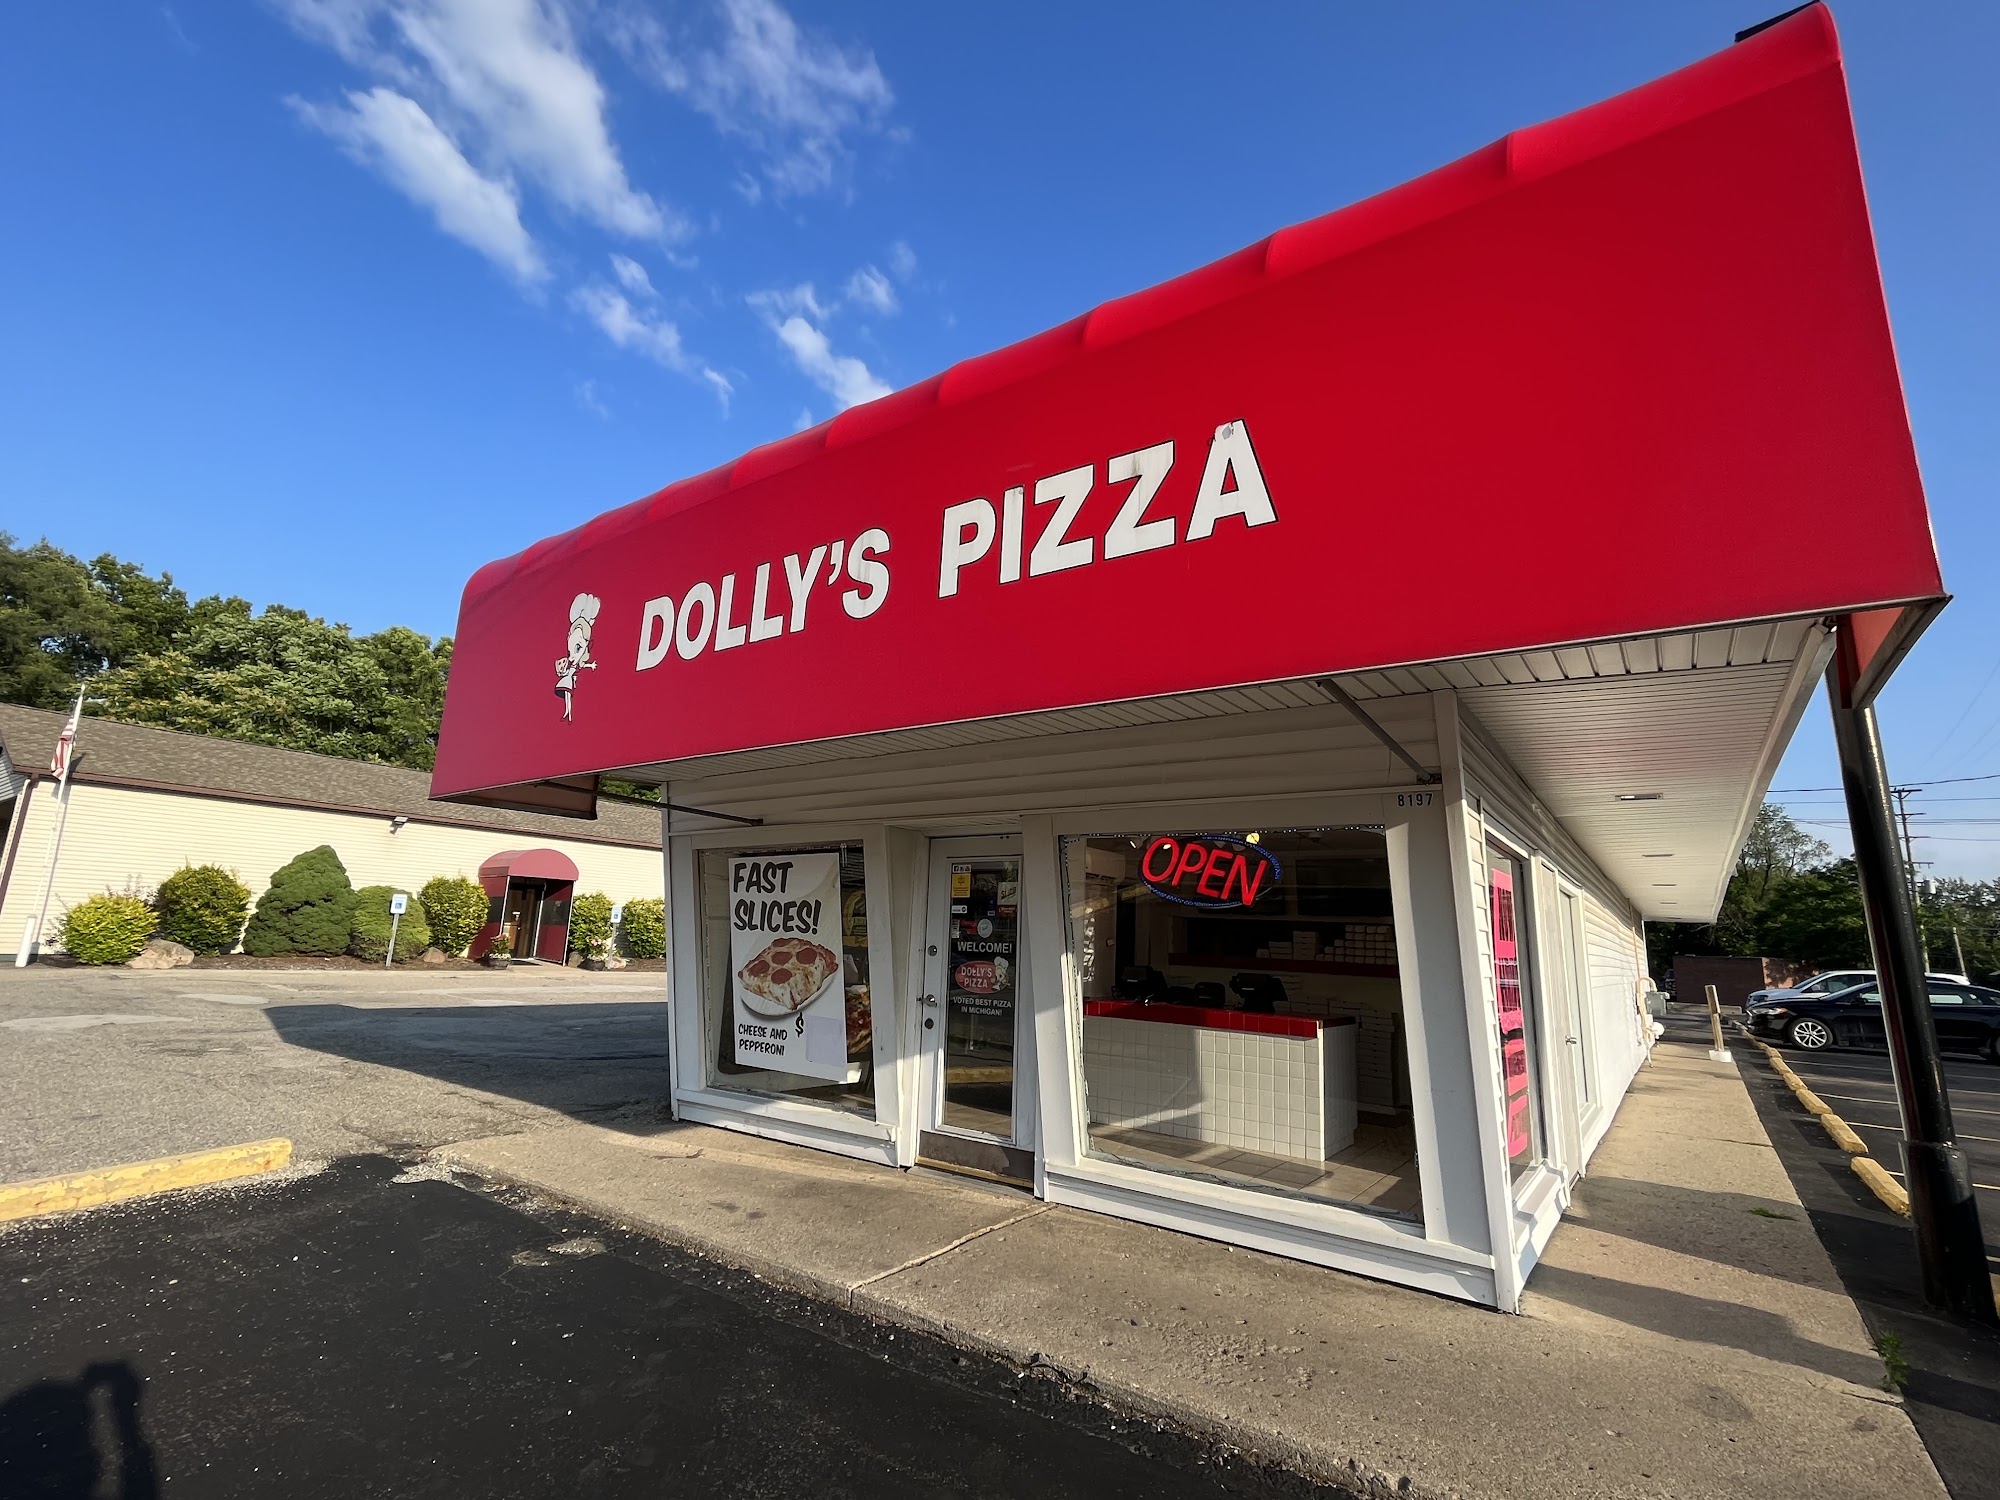 Dolly's Pizza